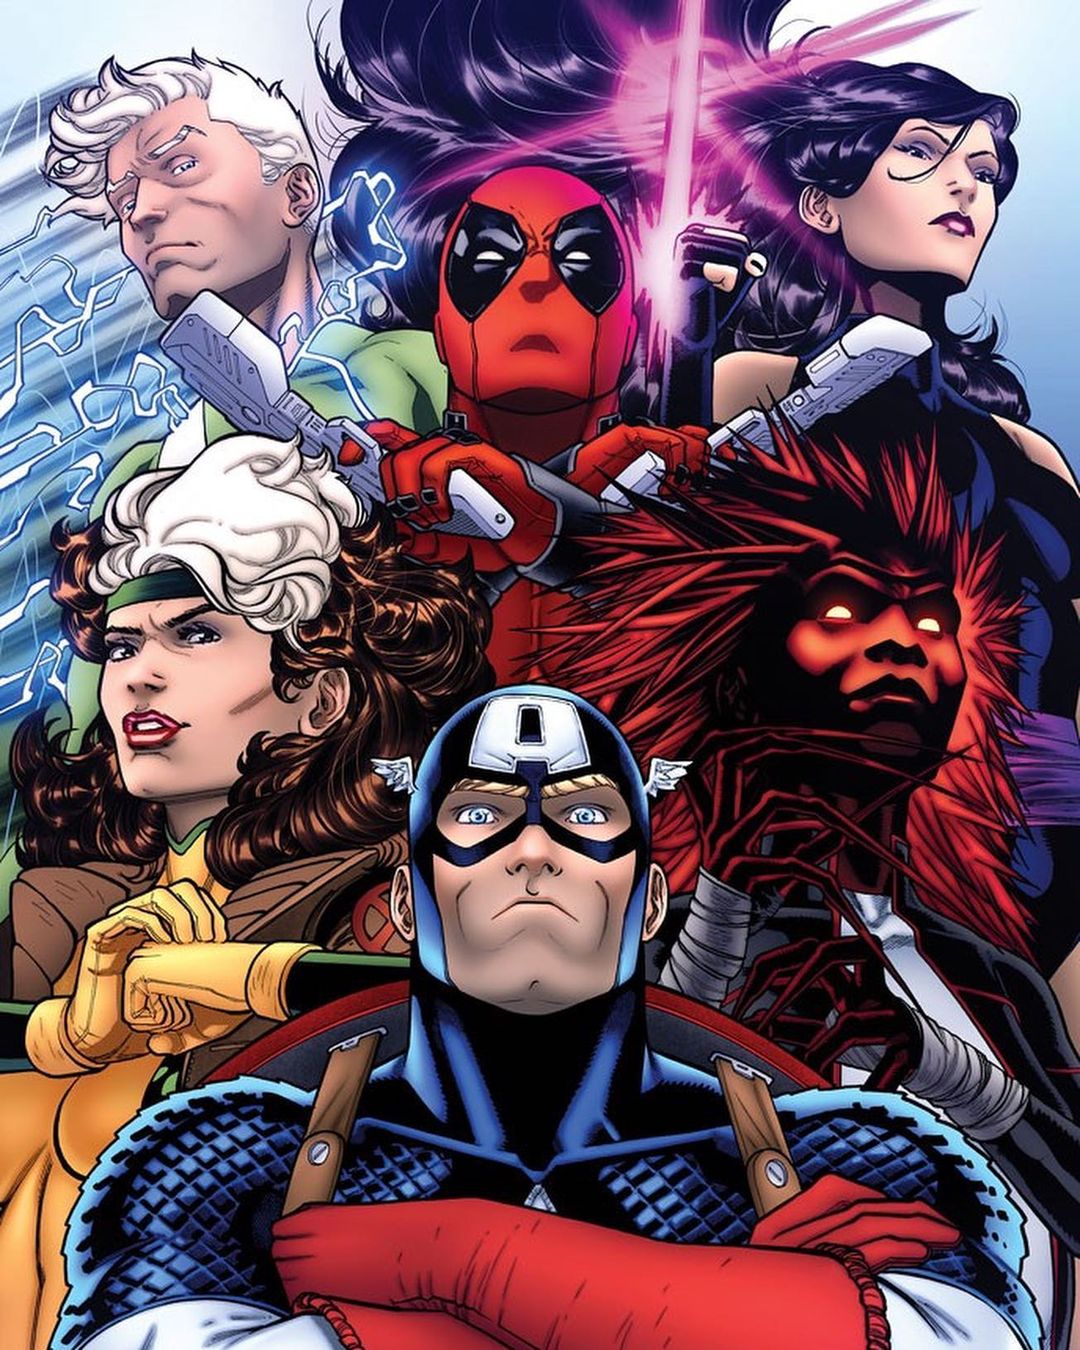 Avengers 5 Writer Reveals How the X-Men Influence the New Movie